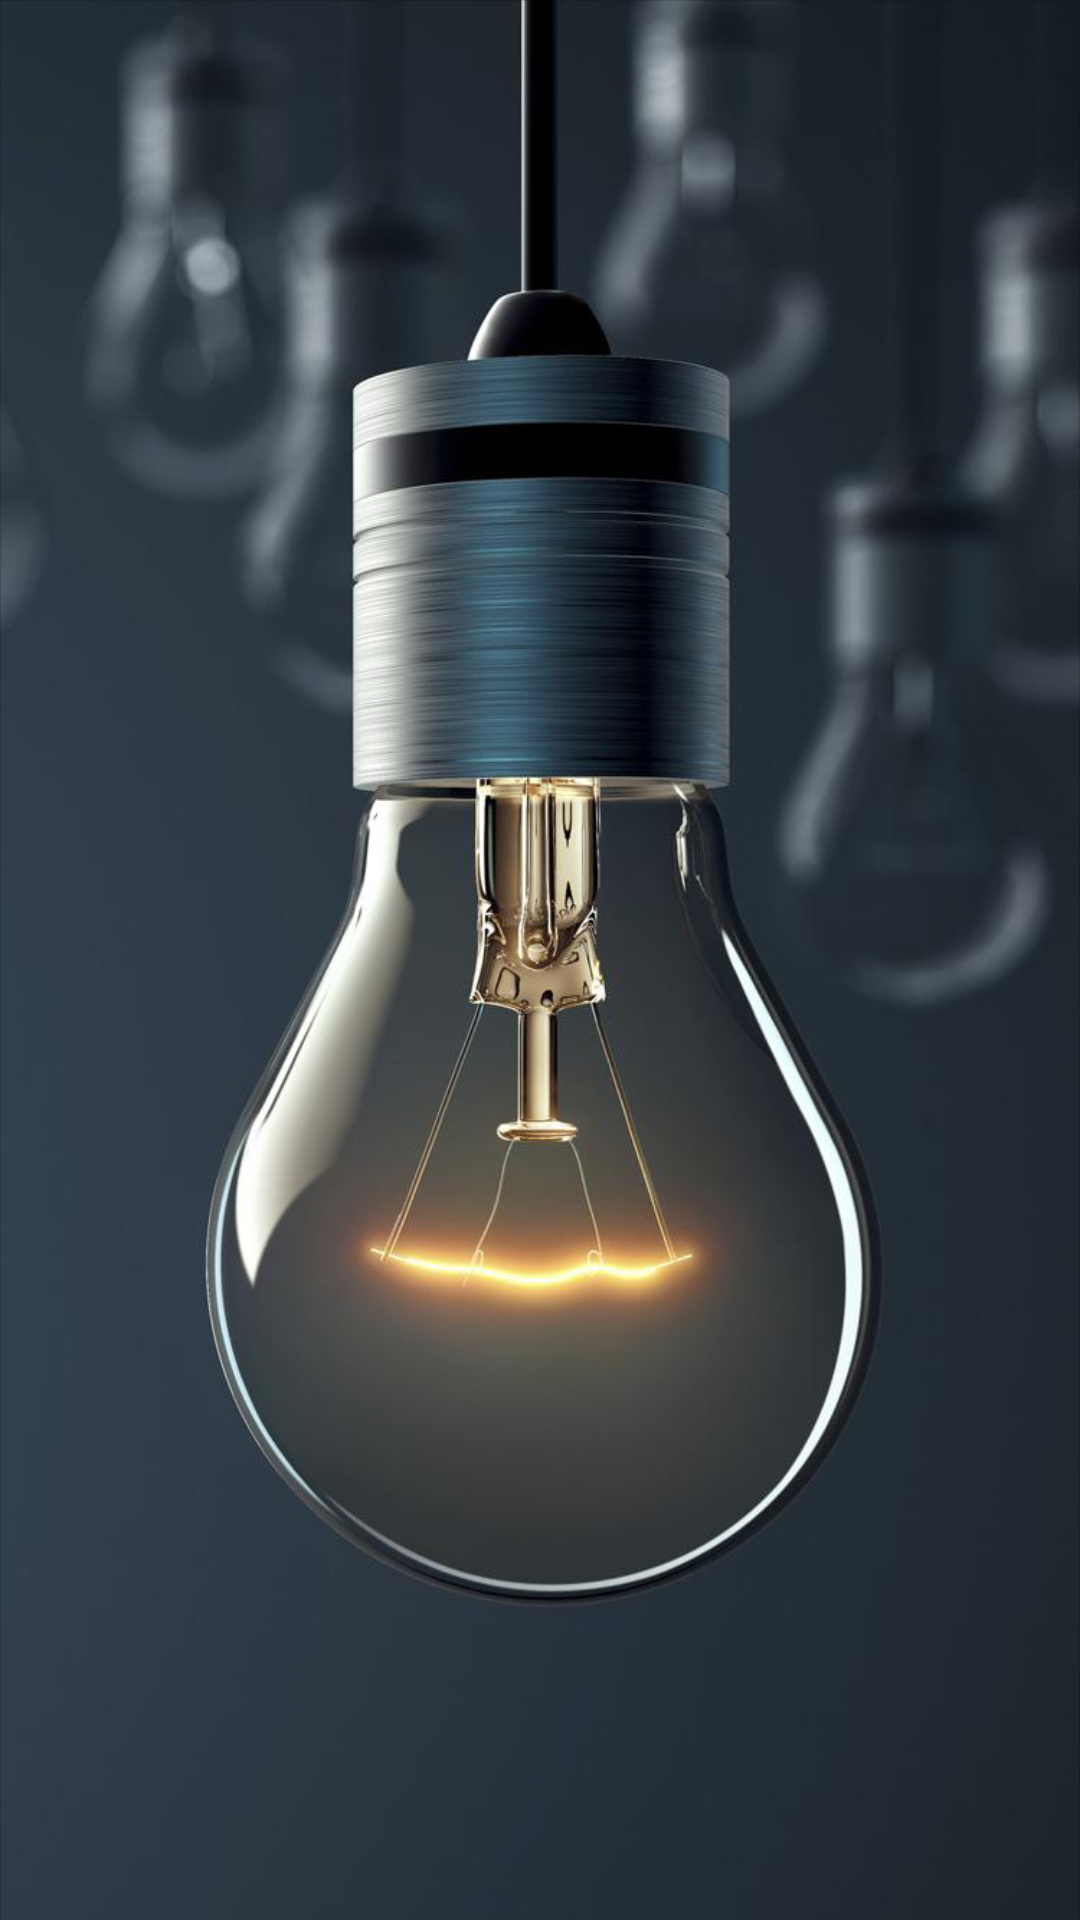 Free Light Bulb Wallpaper For Your Phone